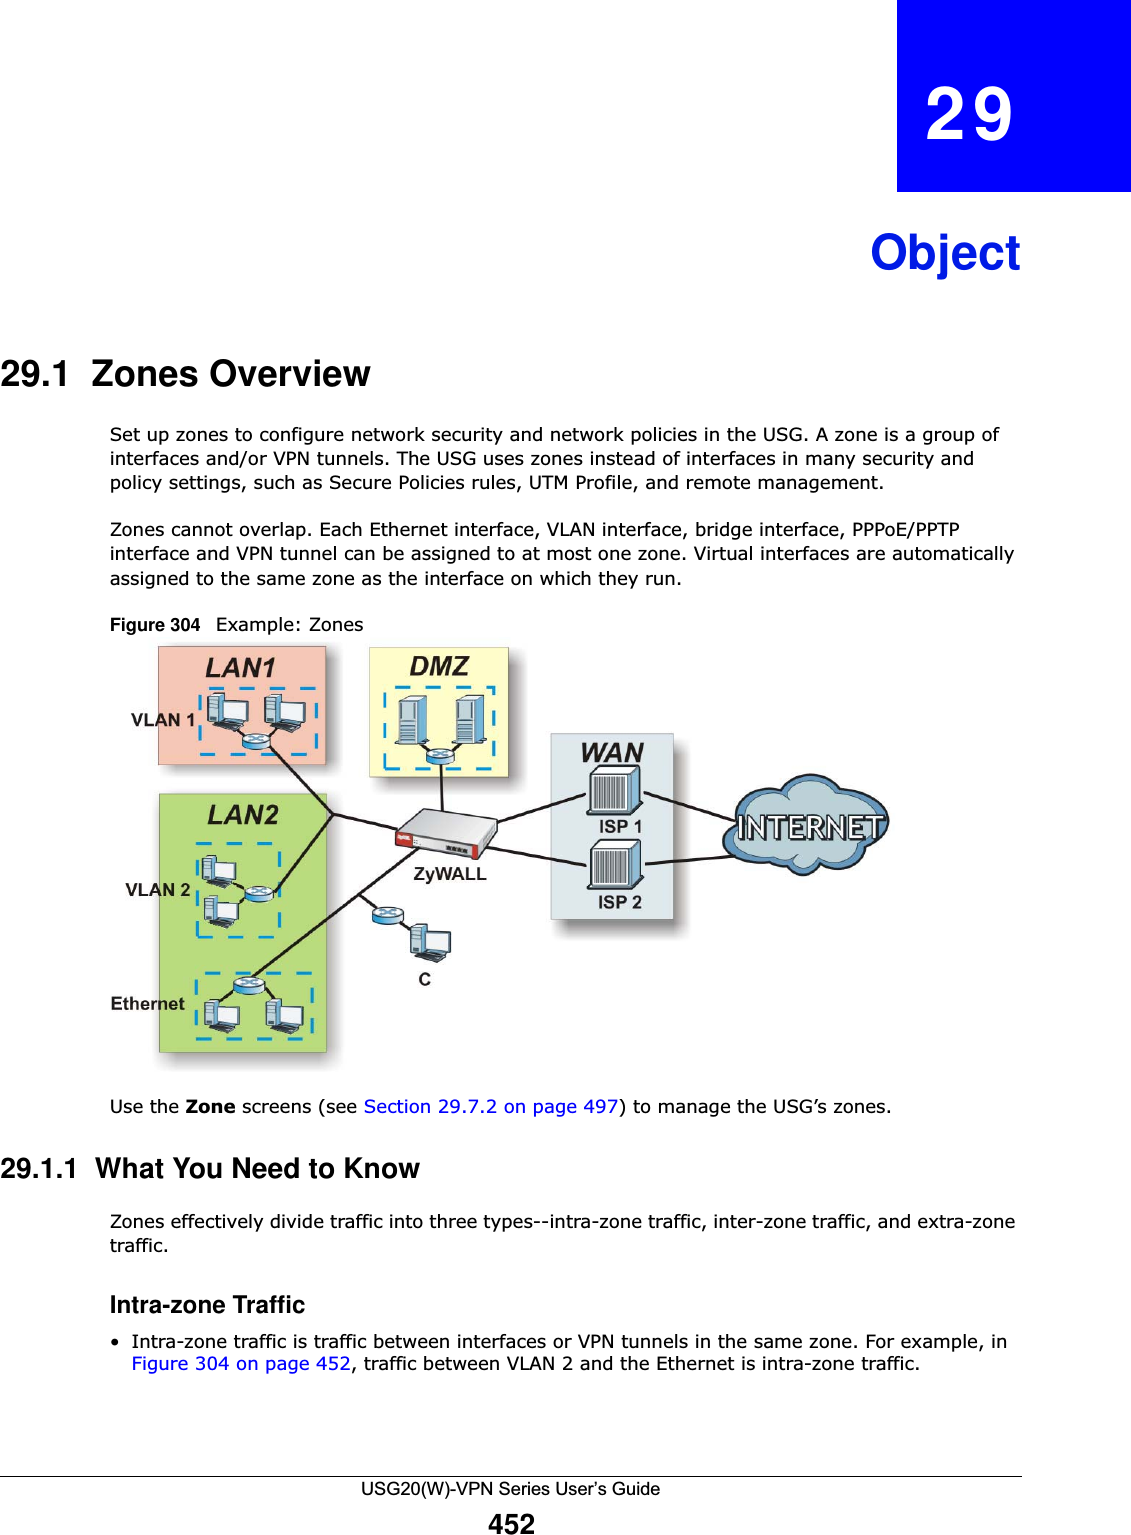 USG20(W)-VPN Series User’s Guide452CHAPTER   29Object29.1  Zones OverviewSet up zones to configure network security and network policies in the USG. A zone is a group of interfaces and/or VPN tunnels. The USG uses zones instead of interfaces in many security and policy settings, such as Secure Policies rules, UTM Profile, and remote management.Zones cannot overlap. Each Ethernet interface, VLAN interface, bridge interface, PPPoE/PPTP interface and VPN tunnel can be assigned to at most one zone. Virtual interfaces are automatically assigned to the same zone as the interface on which they run.Figure 304   Example: ZonesUse the Zone screens (see Section 29.7.2 on page 497) to manage the USG’s zones. 29.1.1  What You Need to KnowZones effectively divide traffic into three types--intra-zone traffic, inter-zone traffic, and extra-zone traffic.Intra-zone Traffic• Intra-zone traffic is traffic between interfaces or VPN tunnels in the same zone. For example, in Figure 304 on page 452, traffic between VLAN 2 and the Ethernet is intra-zone traffic.